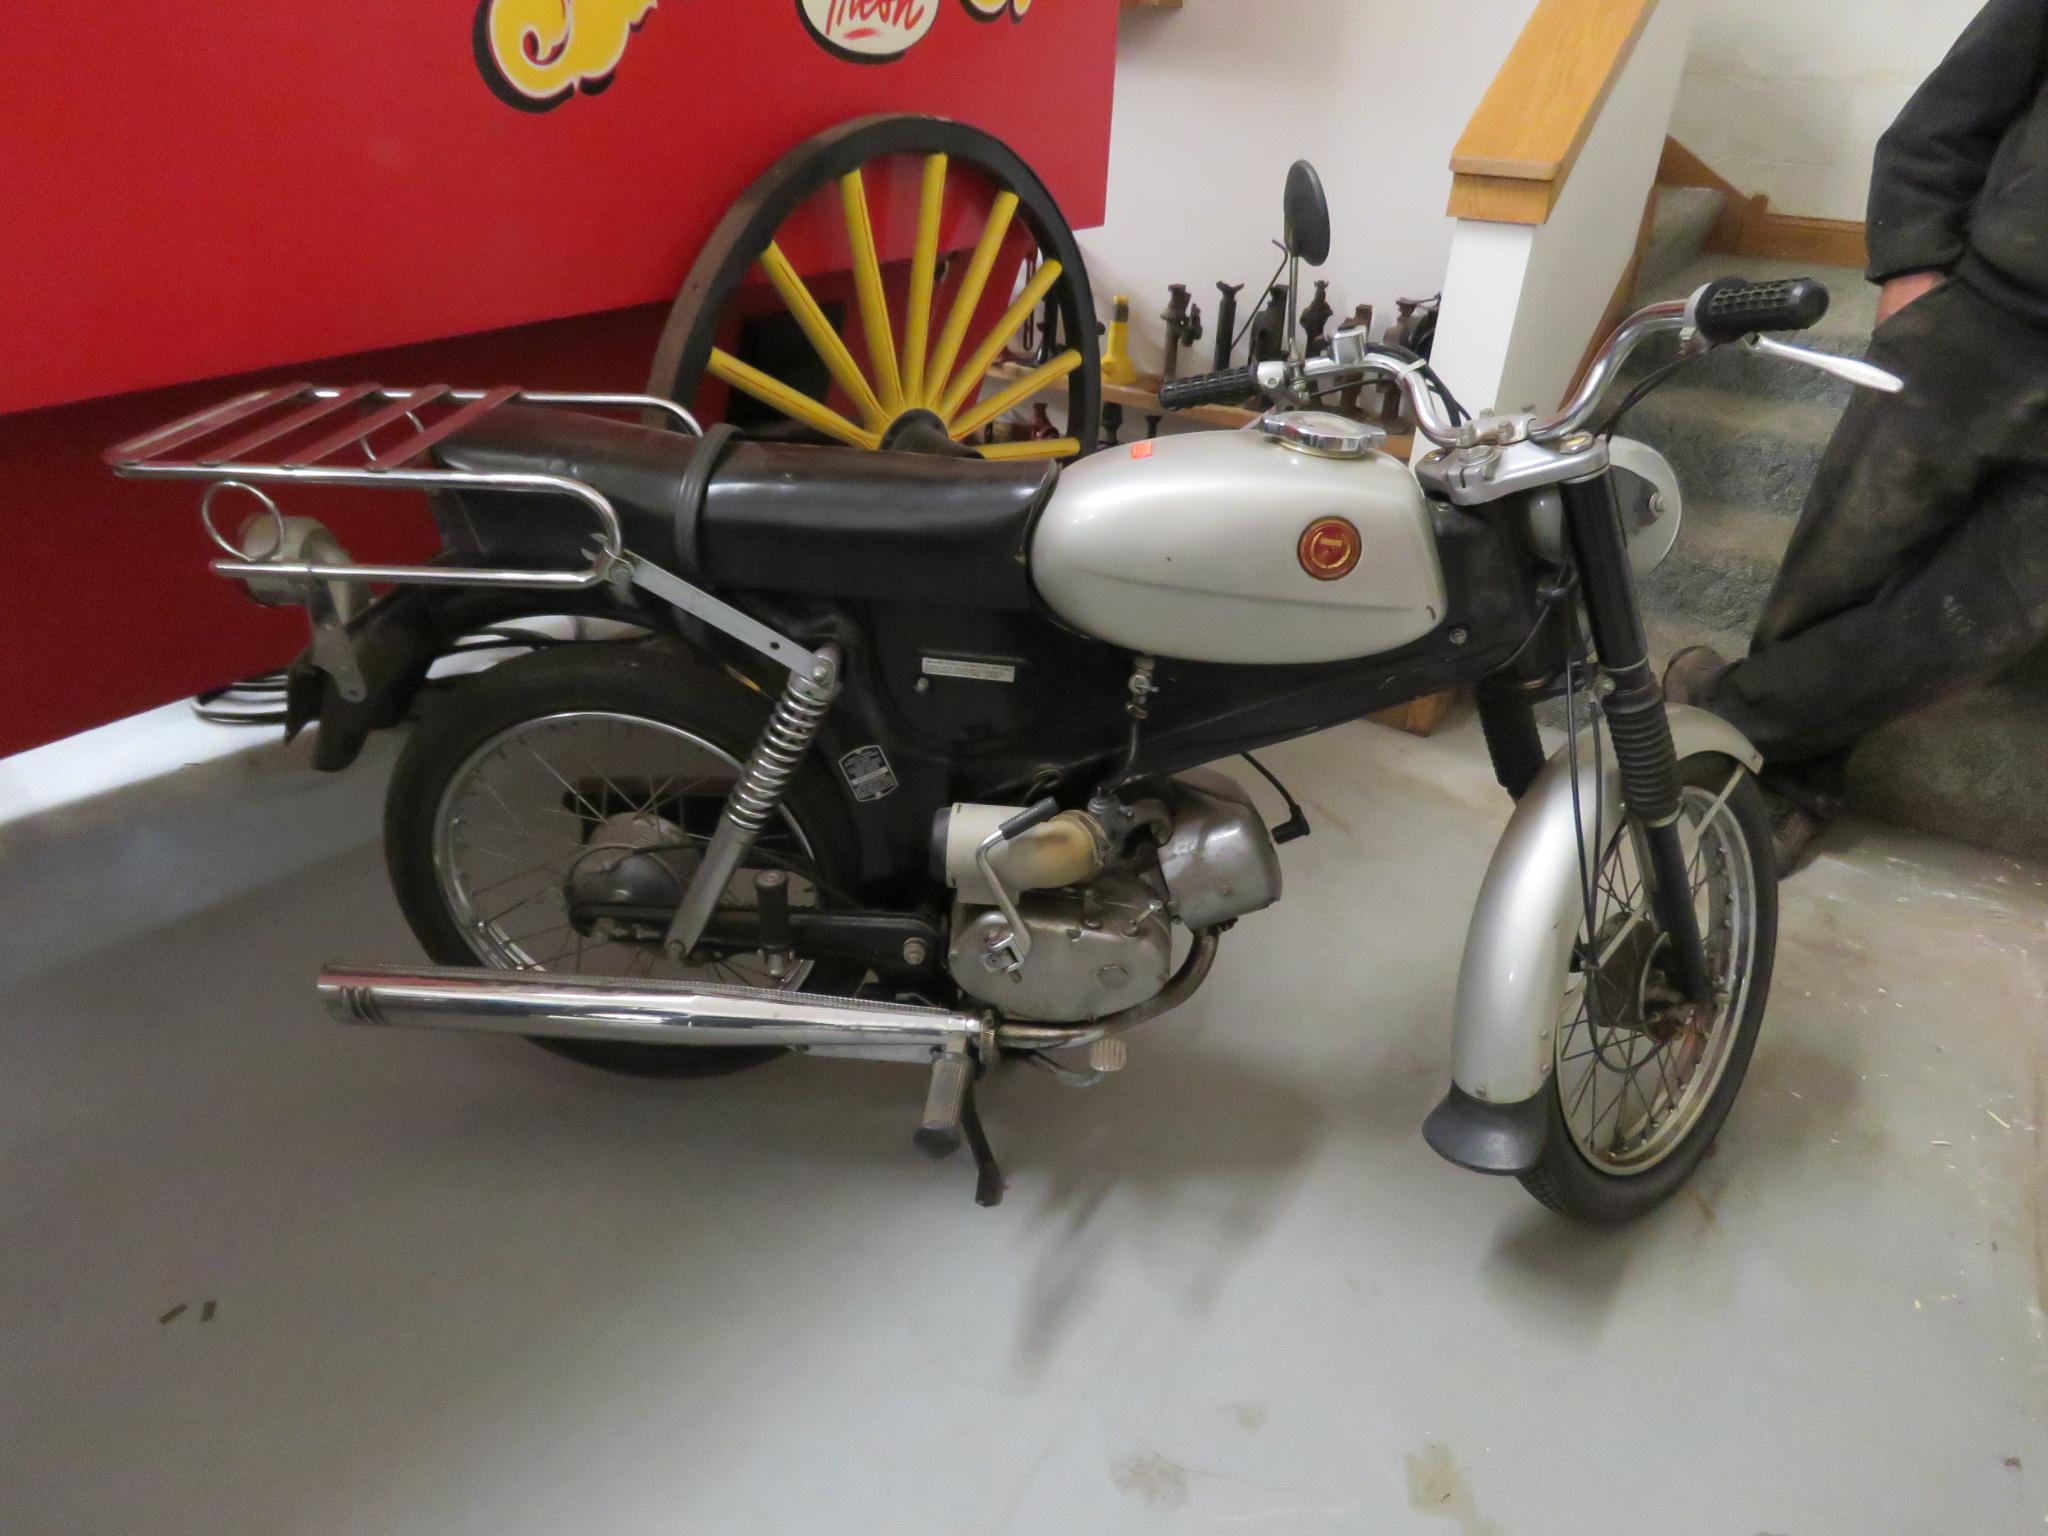 Sears Puch Motorcycle